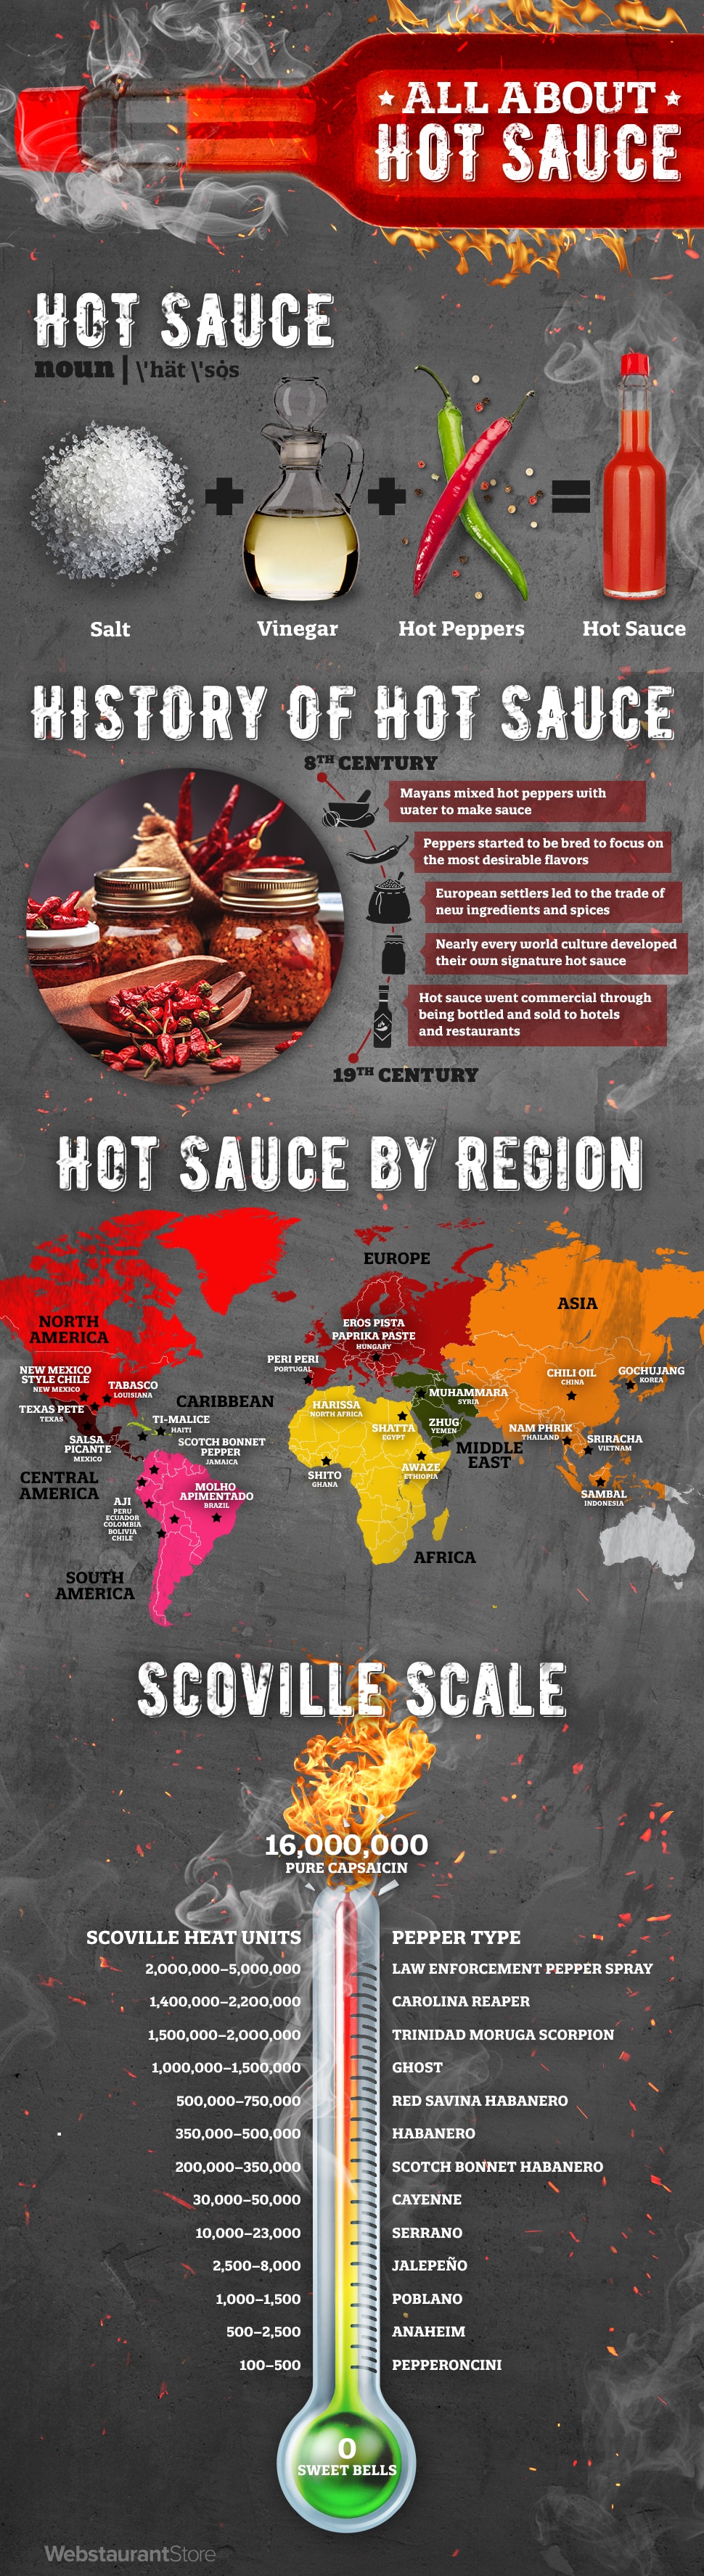 All About Hot Sauce